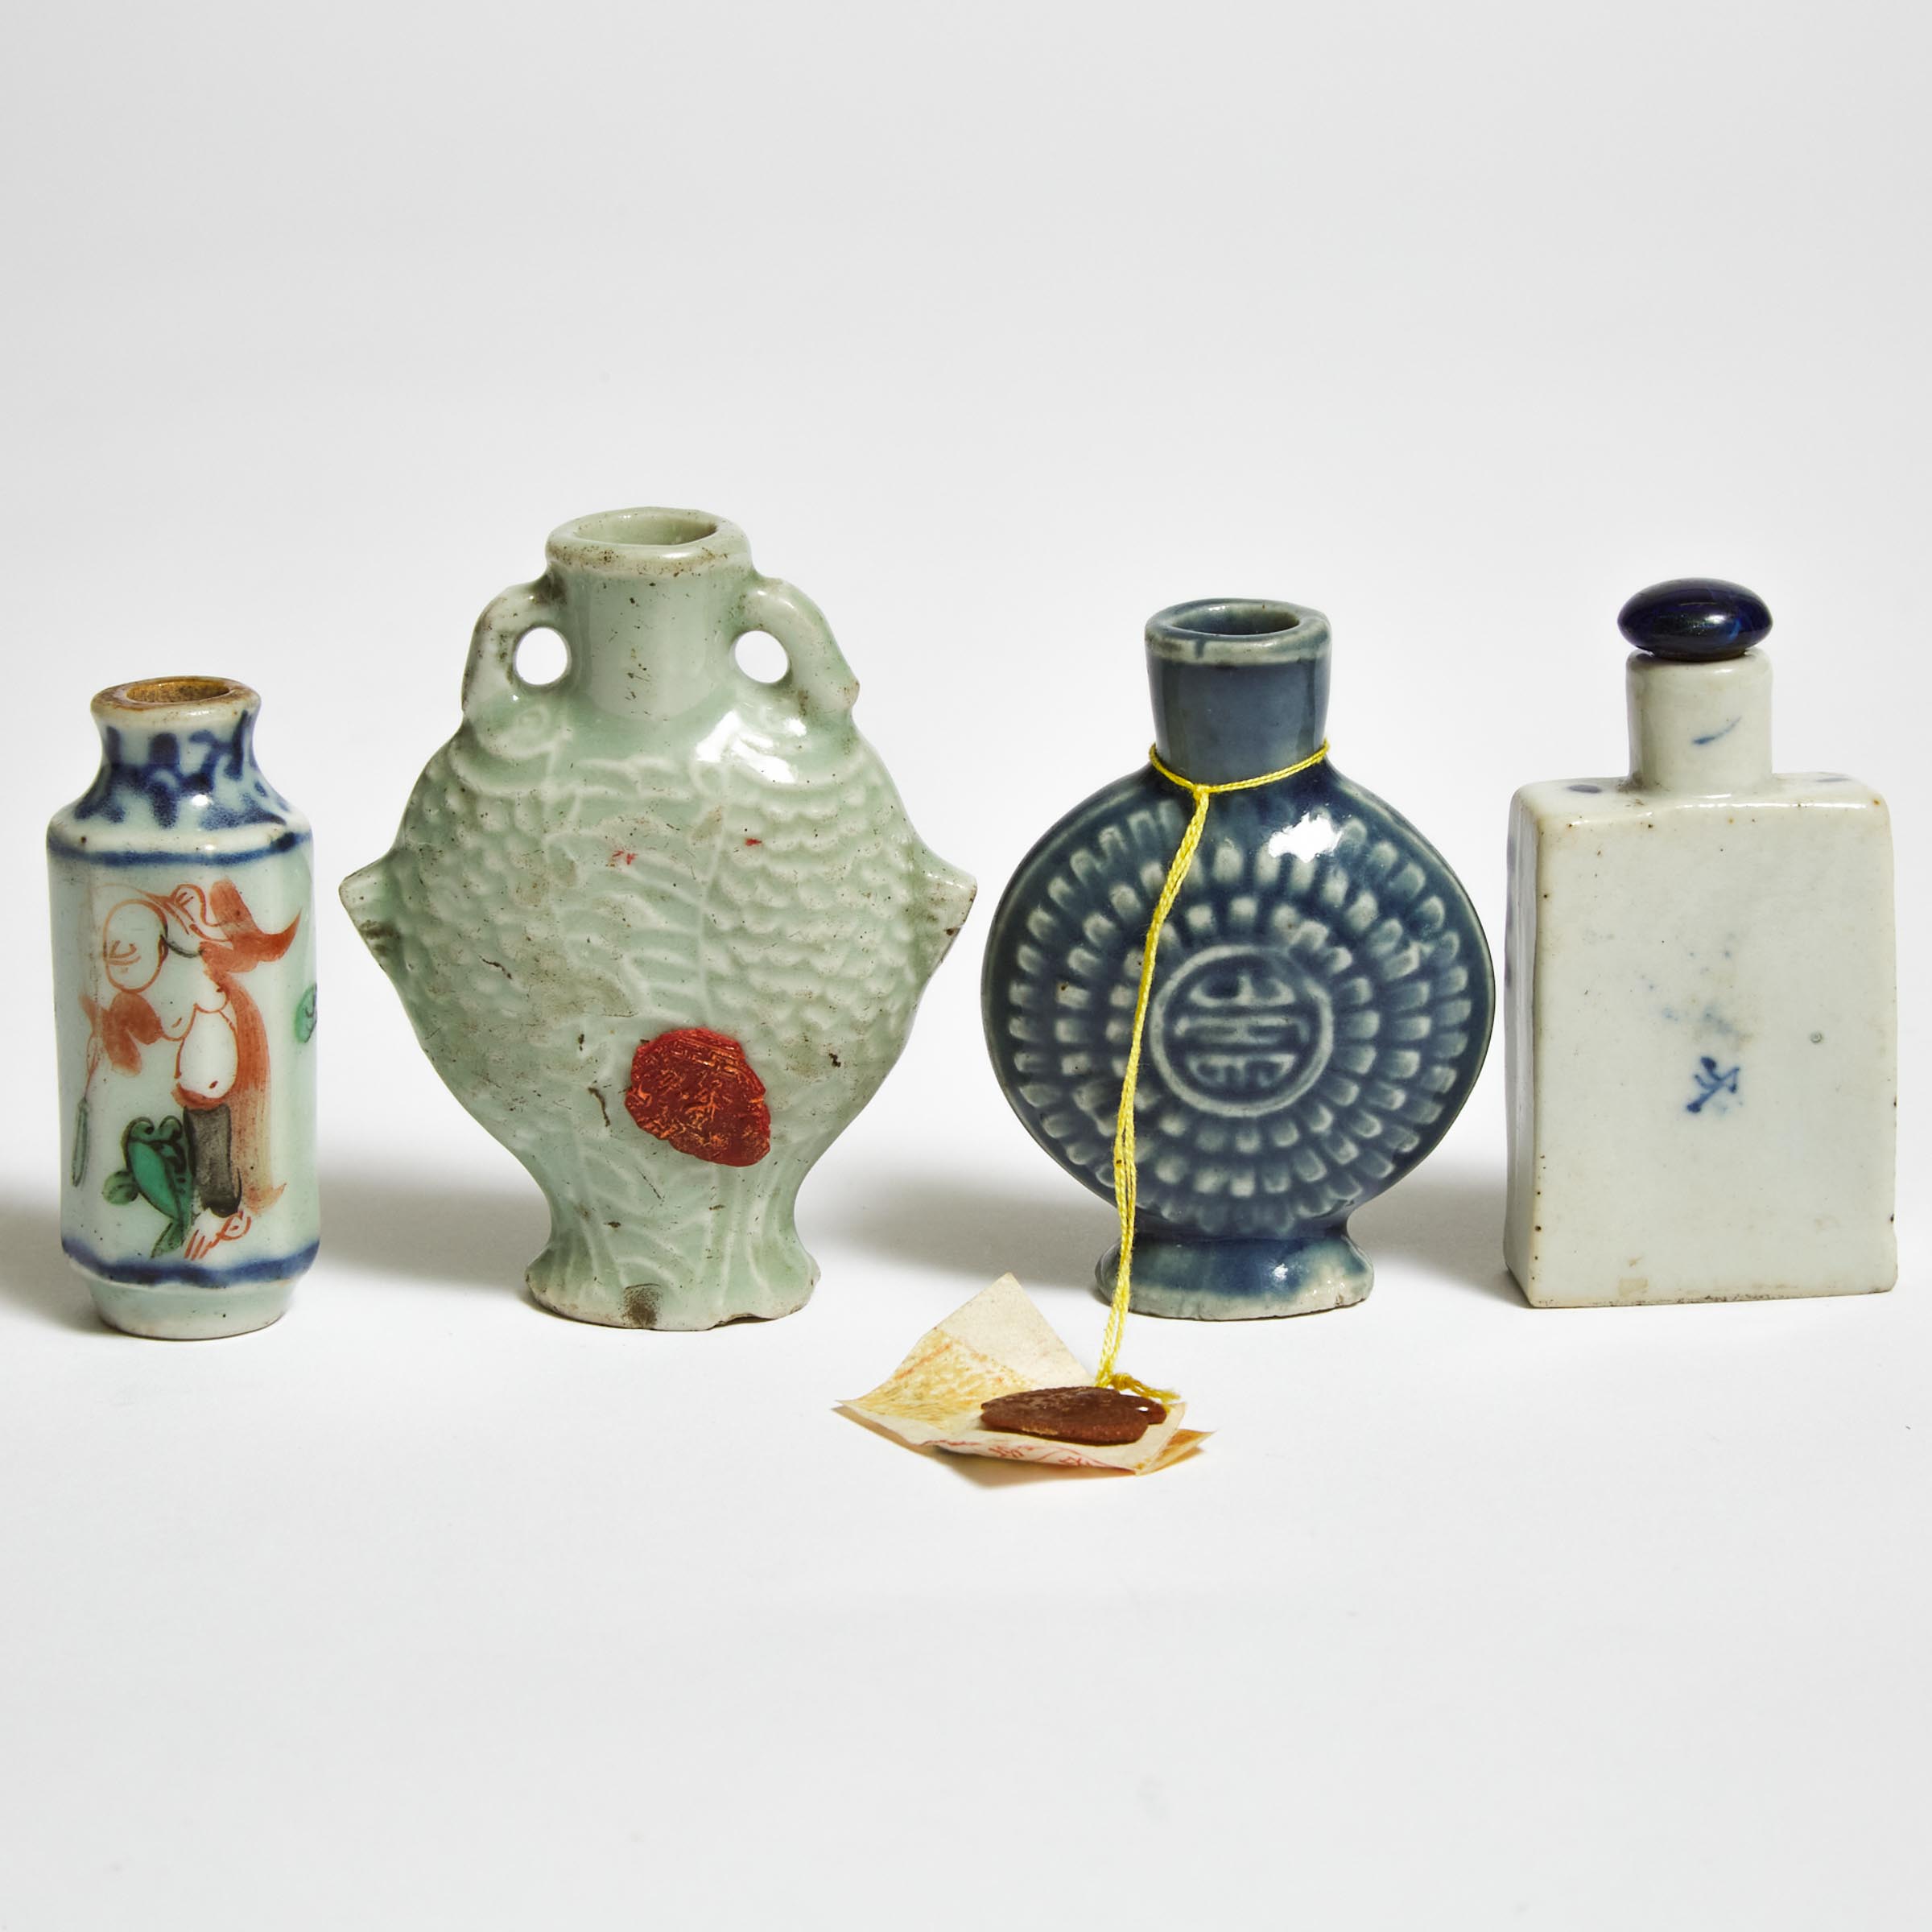 A Group of Four Porcelain Snuff Bottles, 18th/19th Century